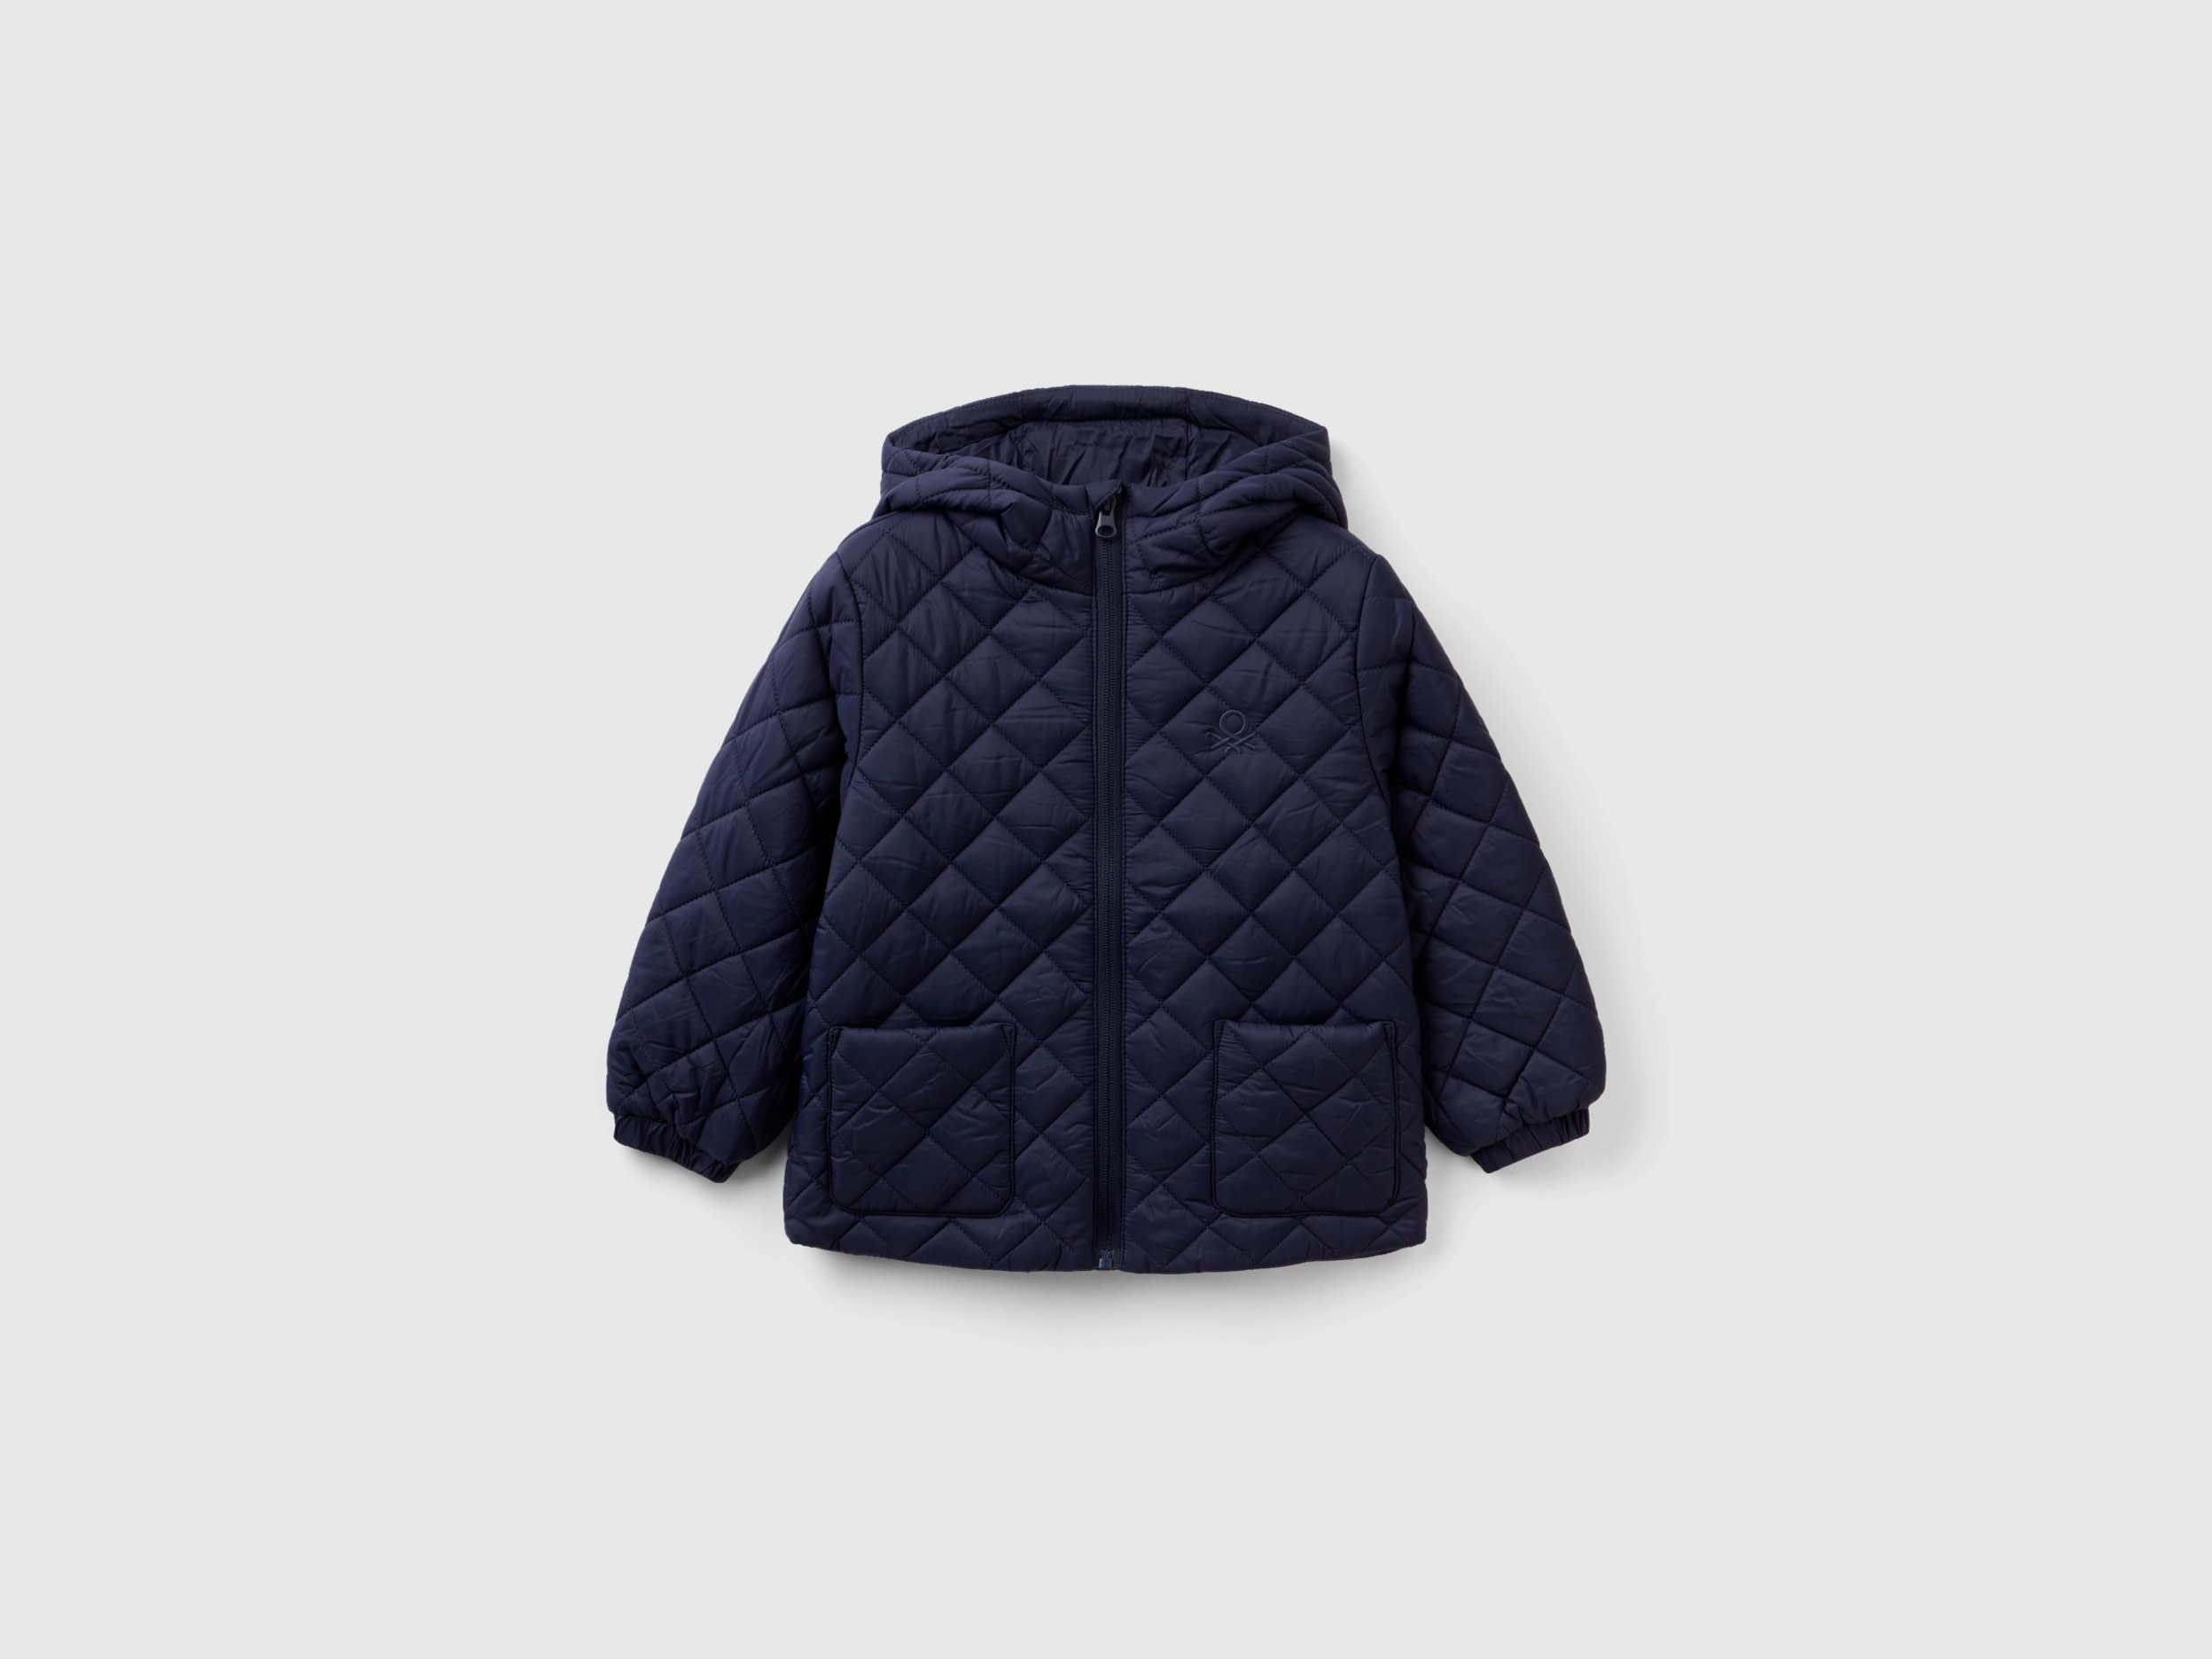 Benetton, Quilted Jacket With Hood, size 5-6, Dark Blue, Kids